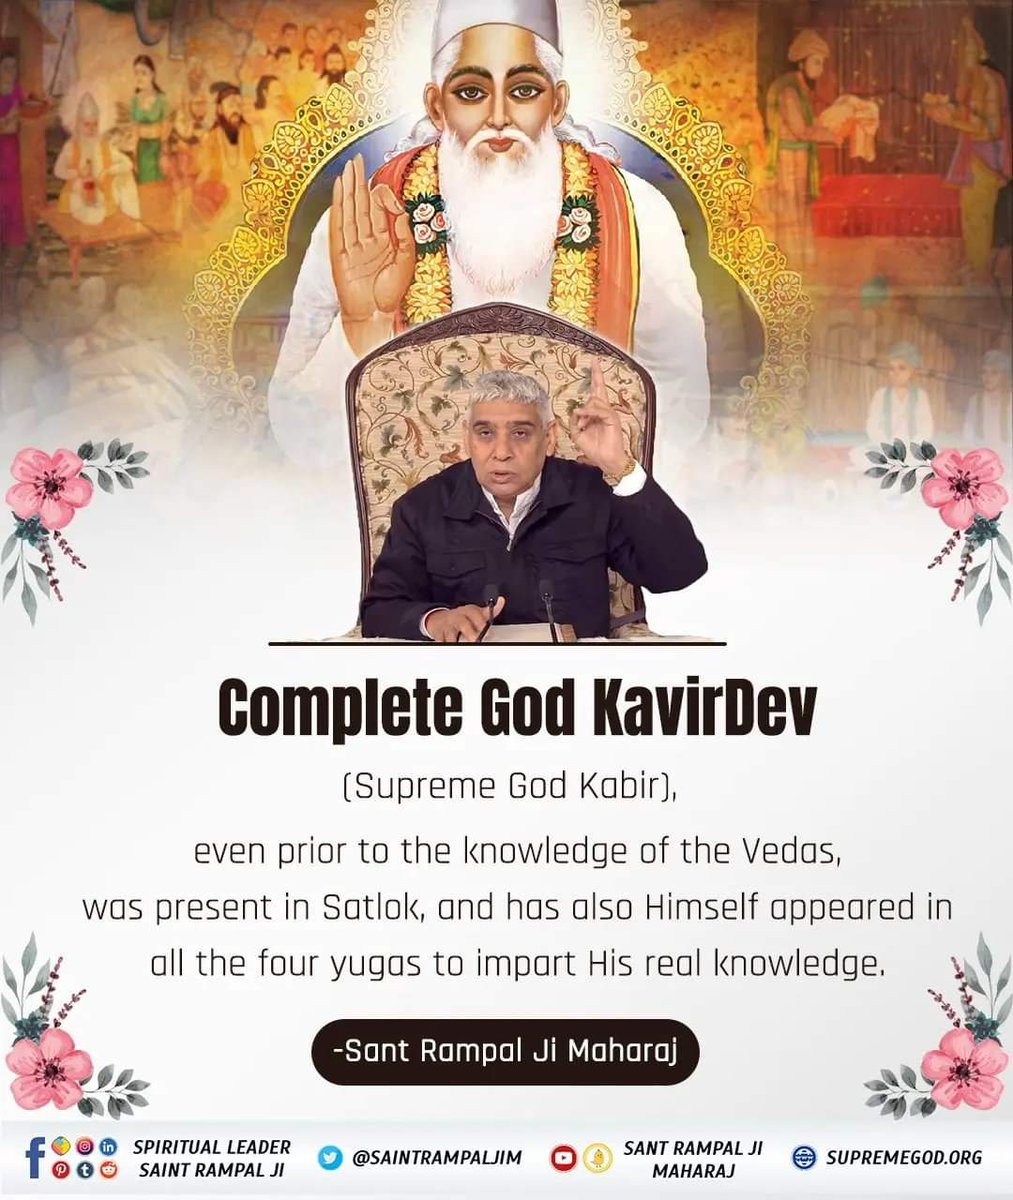 #GodMorningWednesday
COMPLETE GOD KAVIRDEV
(Supreme God Kabir),
even prior to the knowledge of the Vedas, was present in Satlok, and has also Himself appeared in all the four yugas to impart His real knowledge.
Visit Saint Rampal Ji Maharaj Youtube Channel
#wednesdaythought